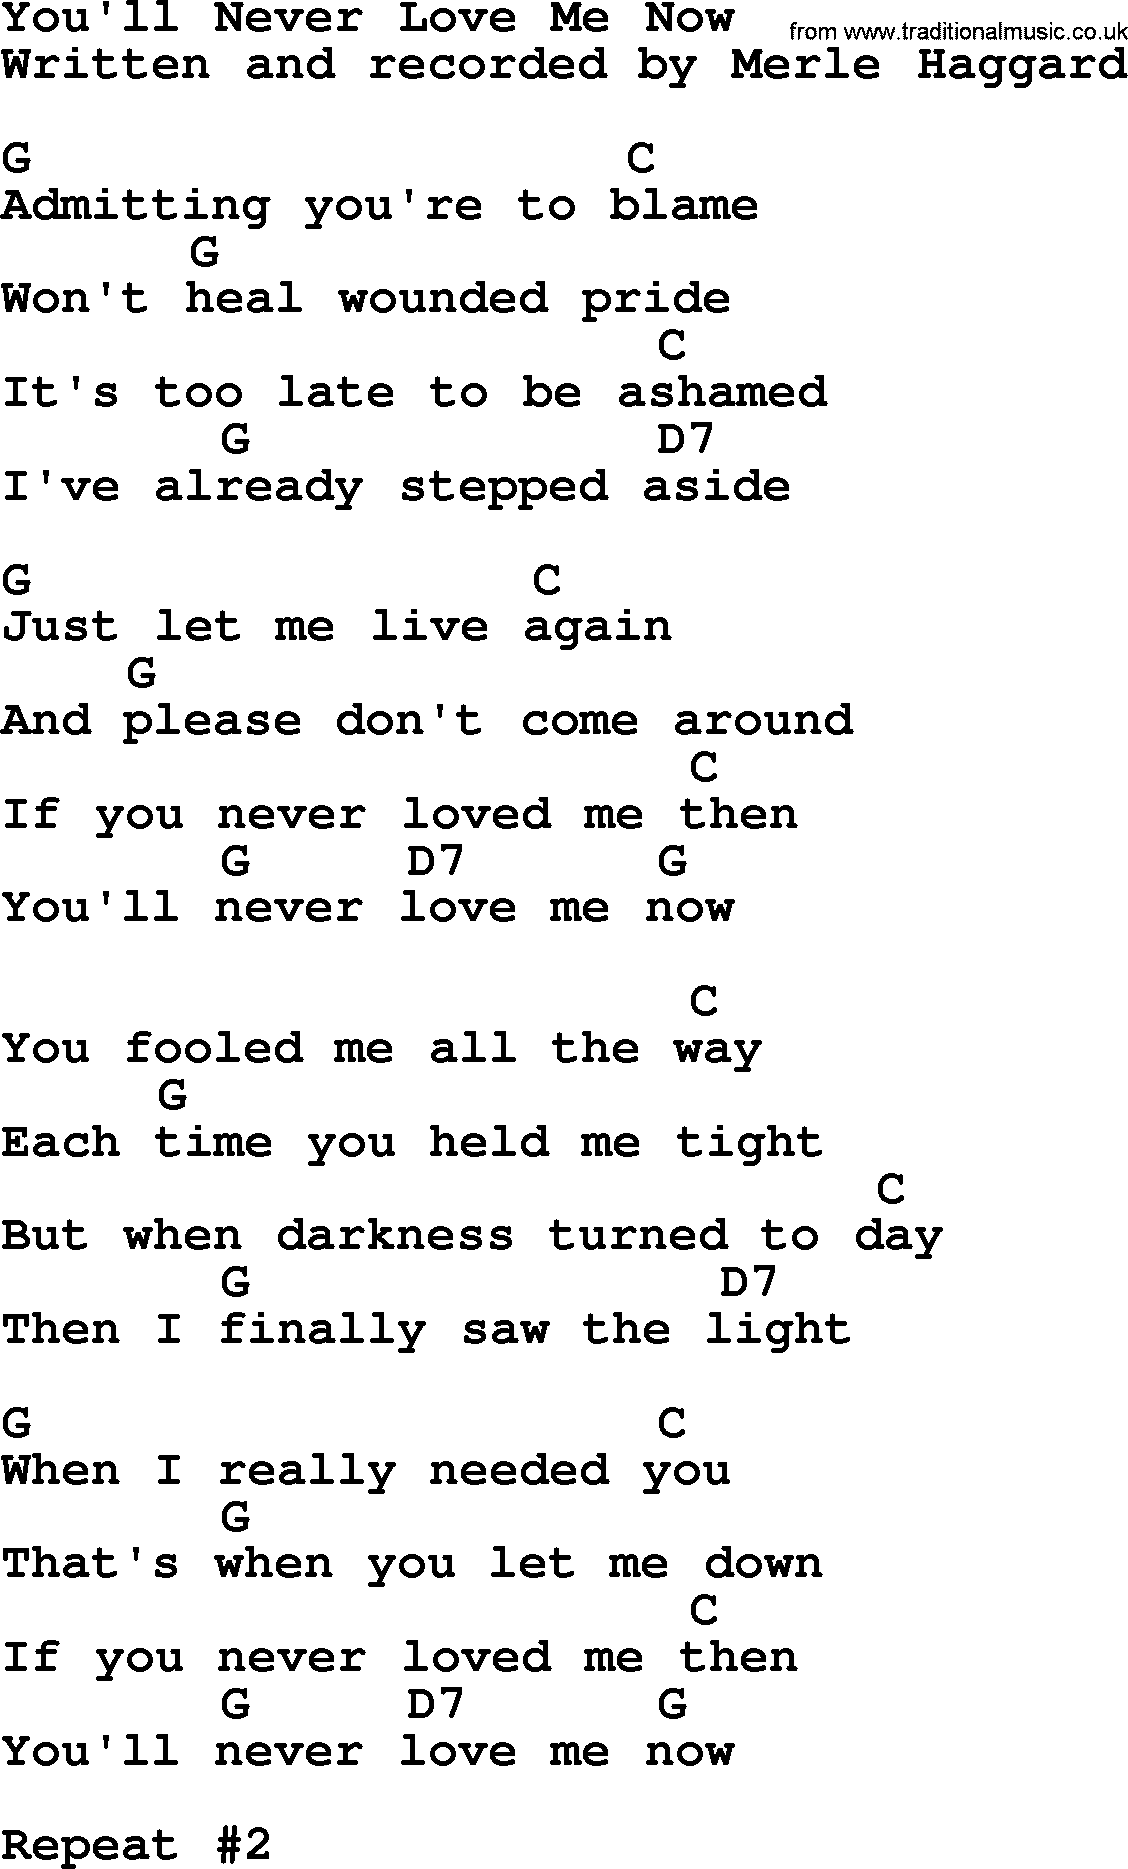 Merle Haggard song: You'll Never Love Me Now, lyrics and chords